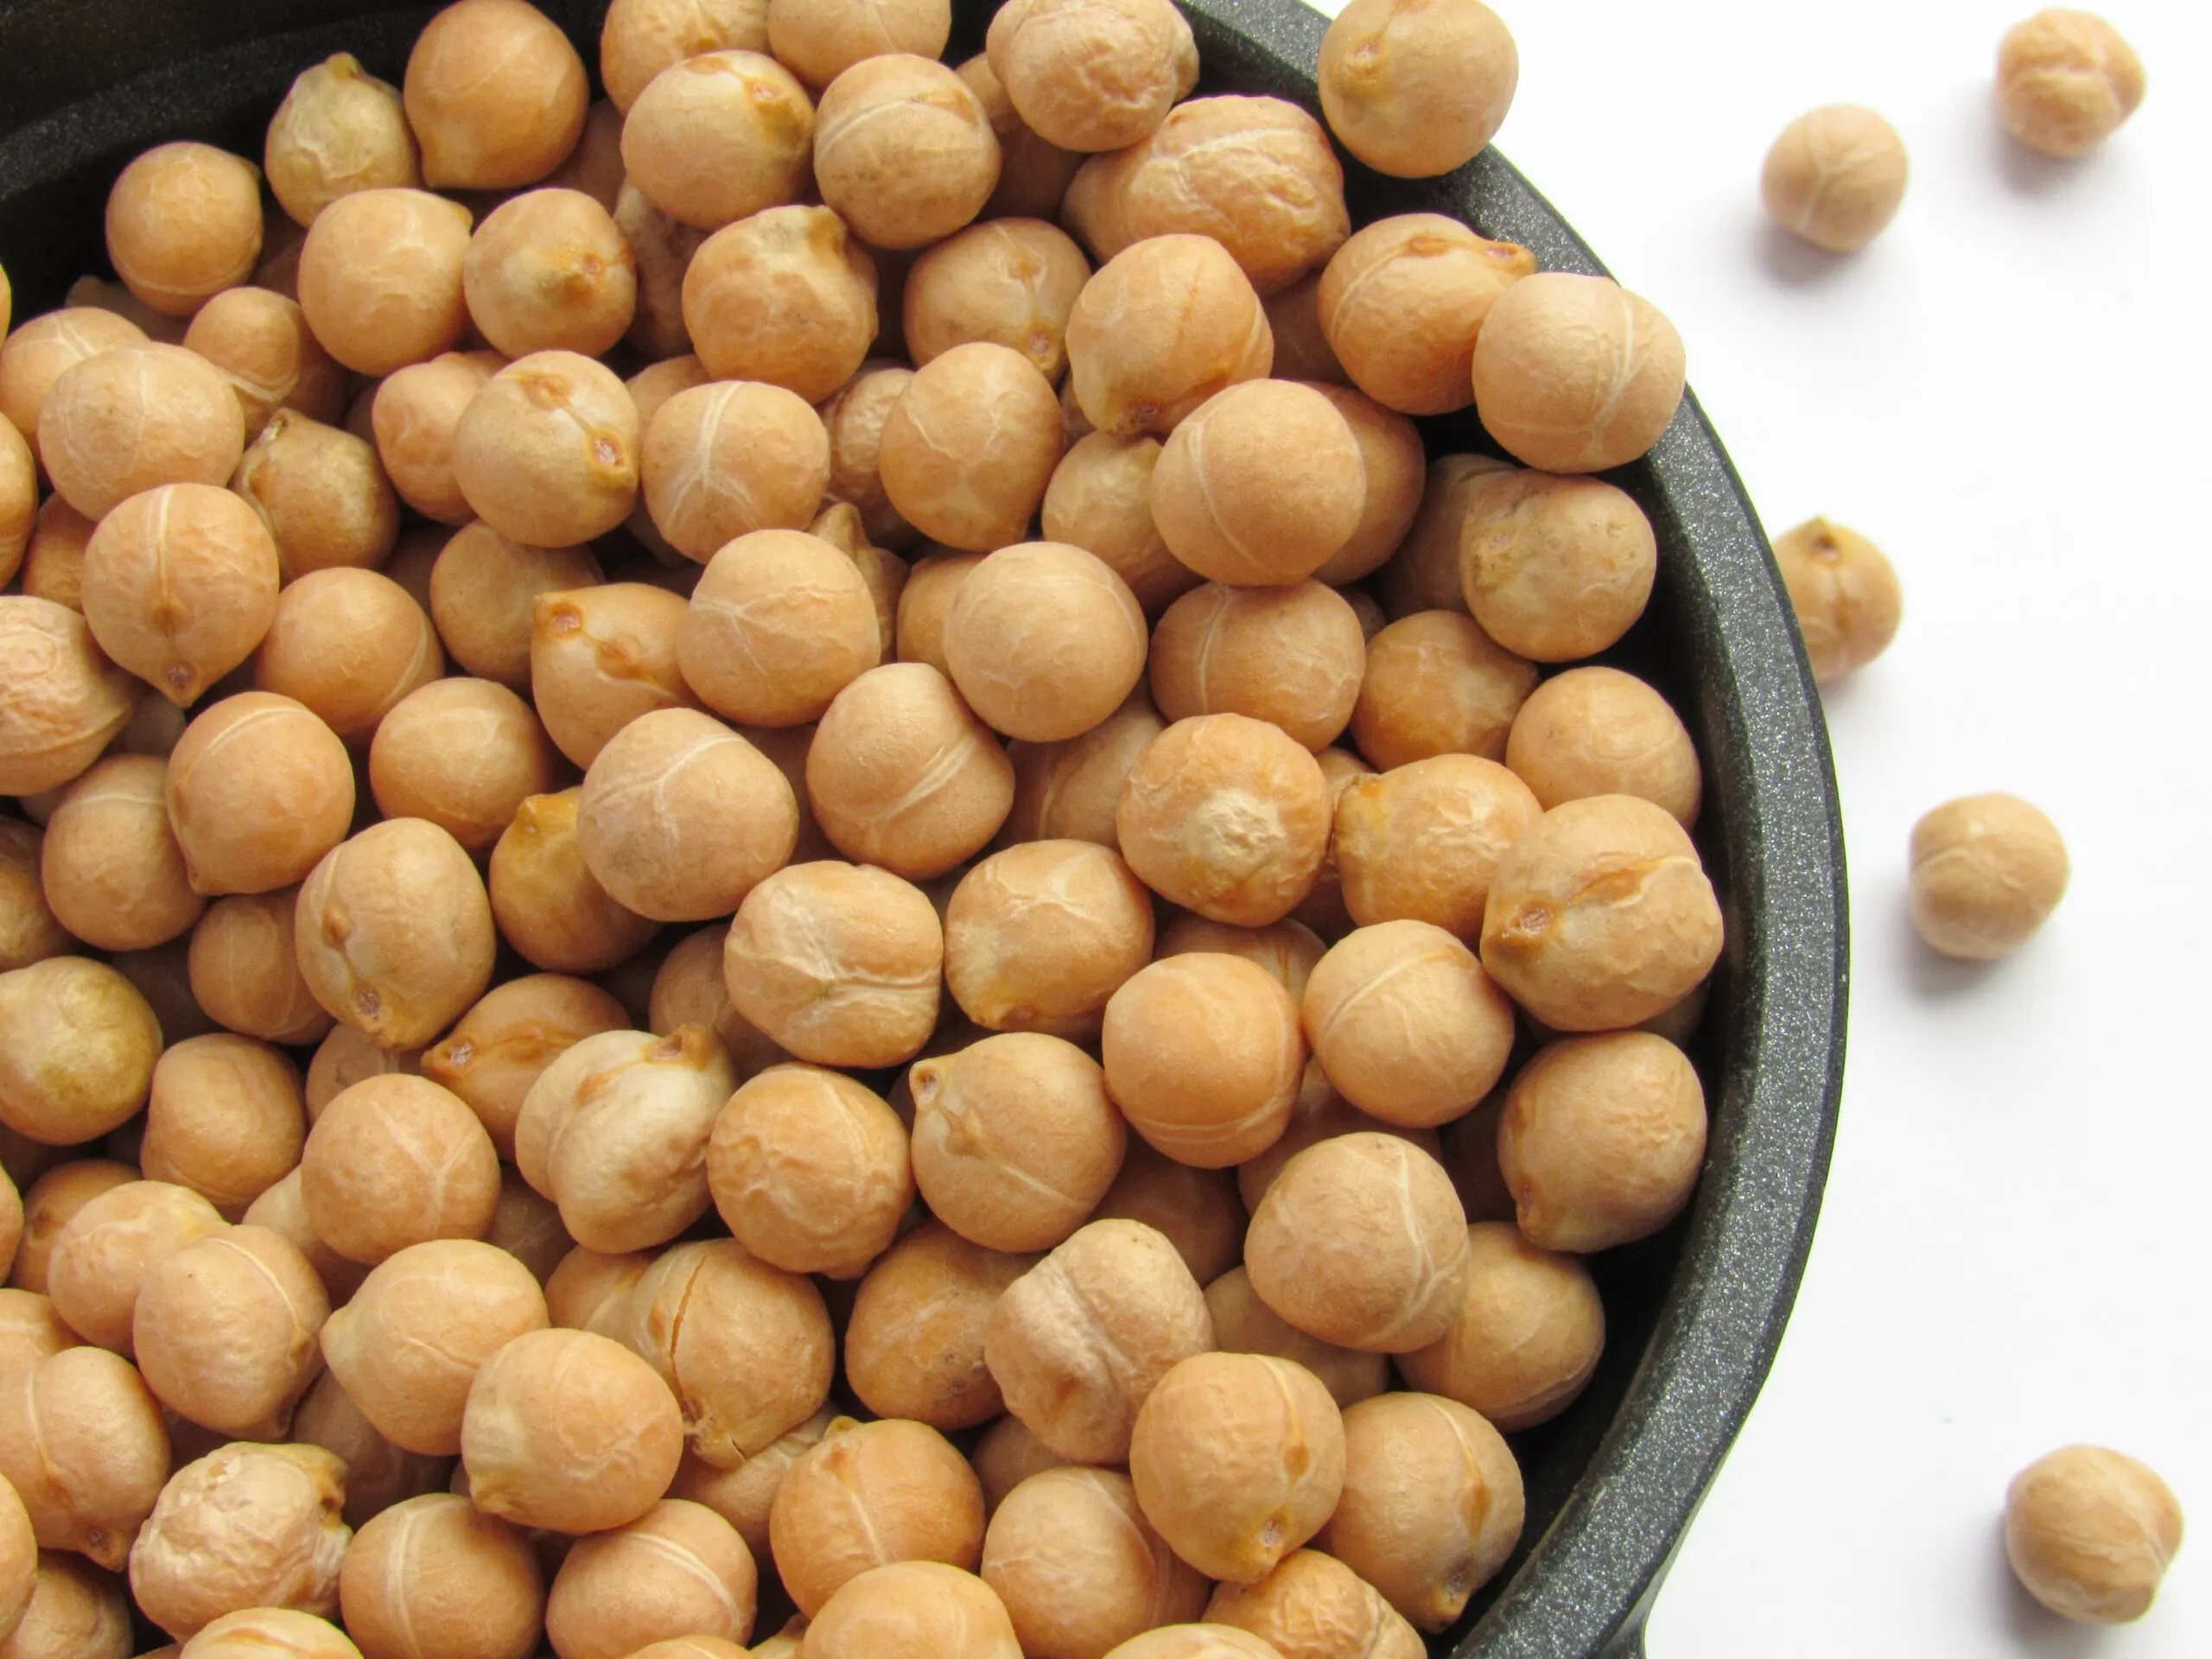 A close up of chickpeas in a bowl.